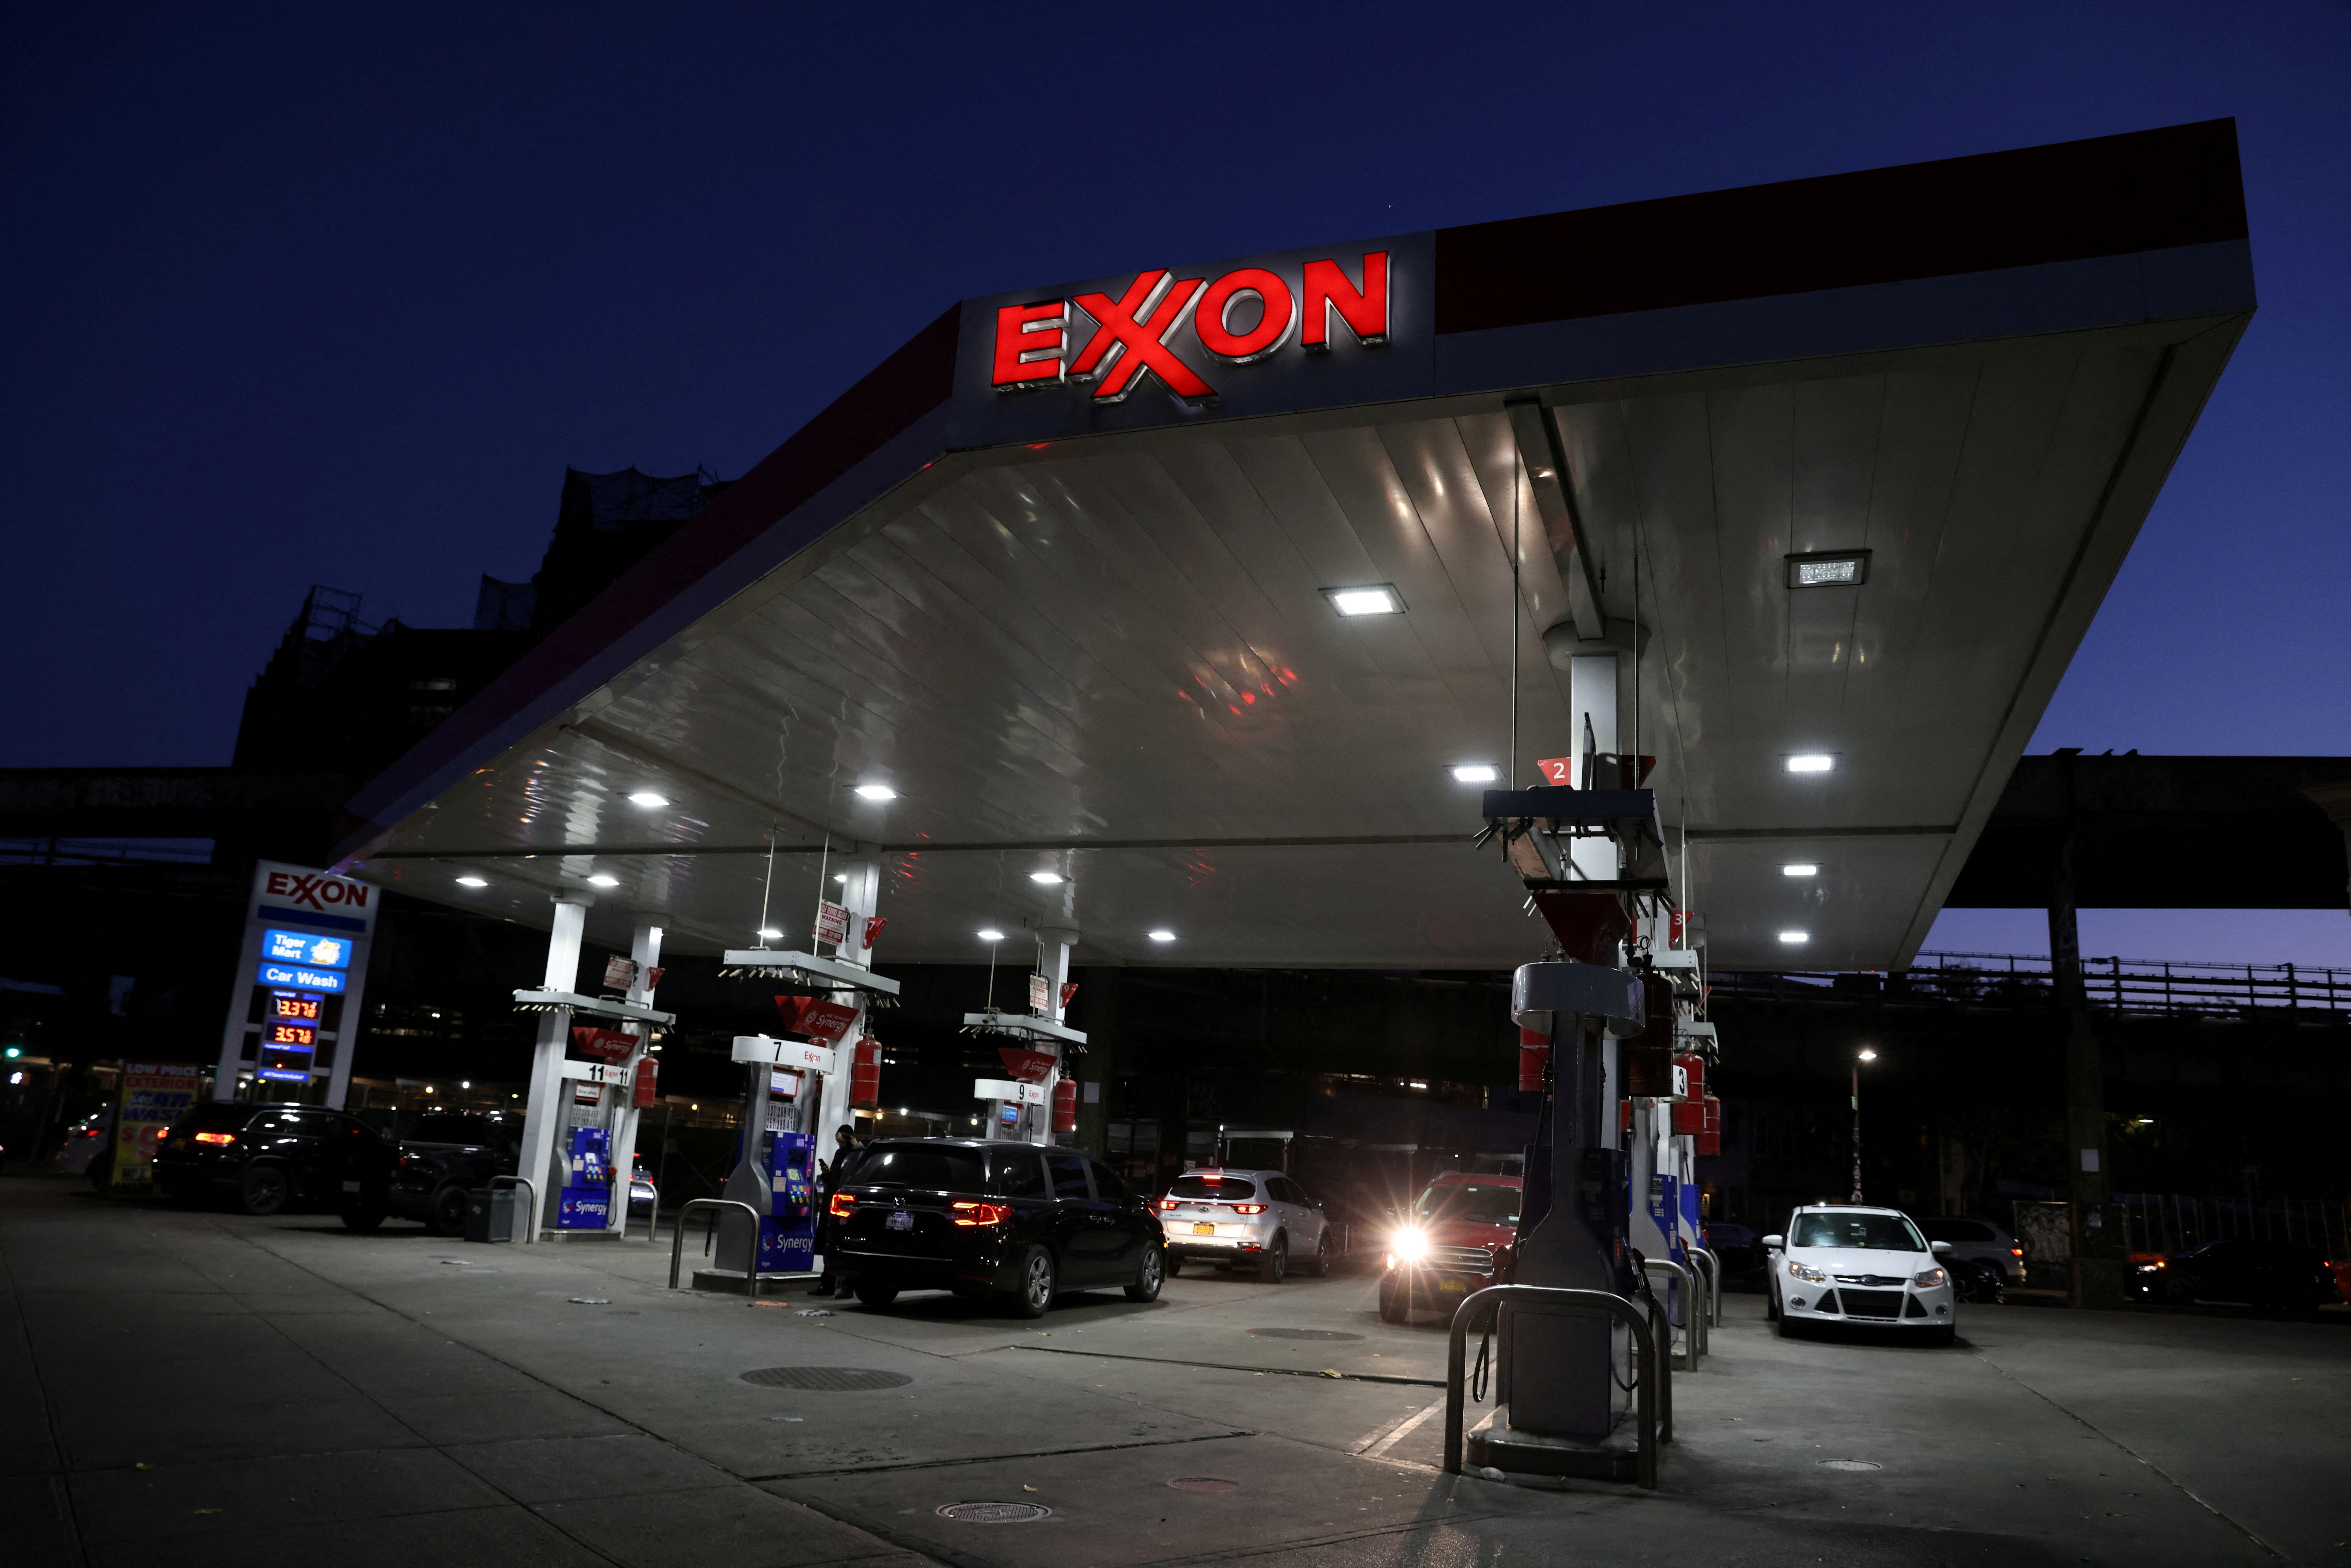 Cars are seen at an Exxon gas station in Brooklyn, New York City